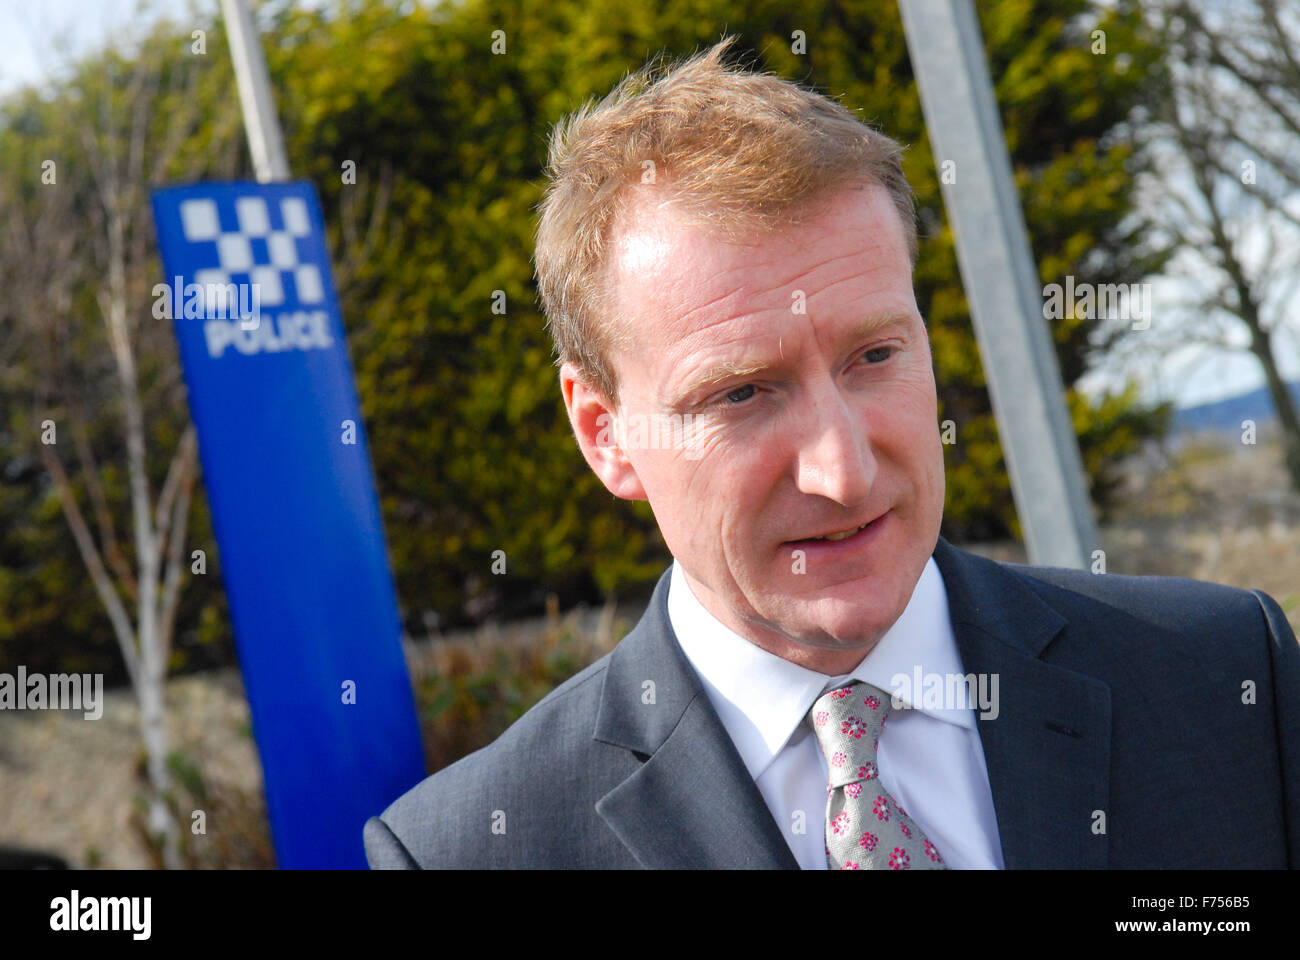 Tavish Scott MSP, leader of the Scottish Liberal Democrats, campaigns outside a police station in Aberdeen, Scotland. Stock Photo